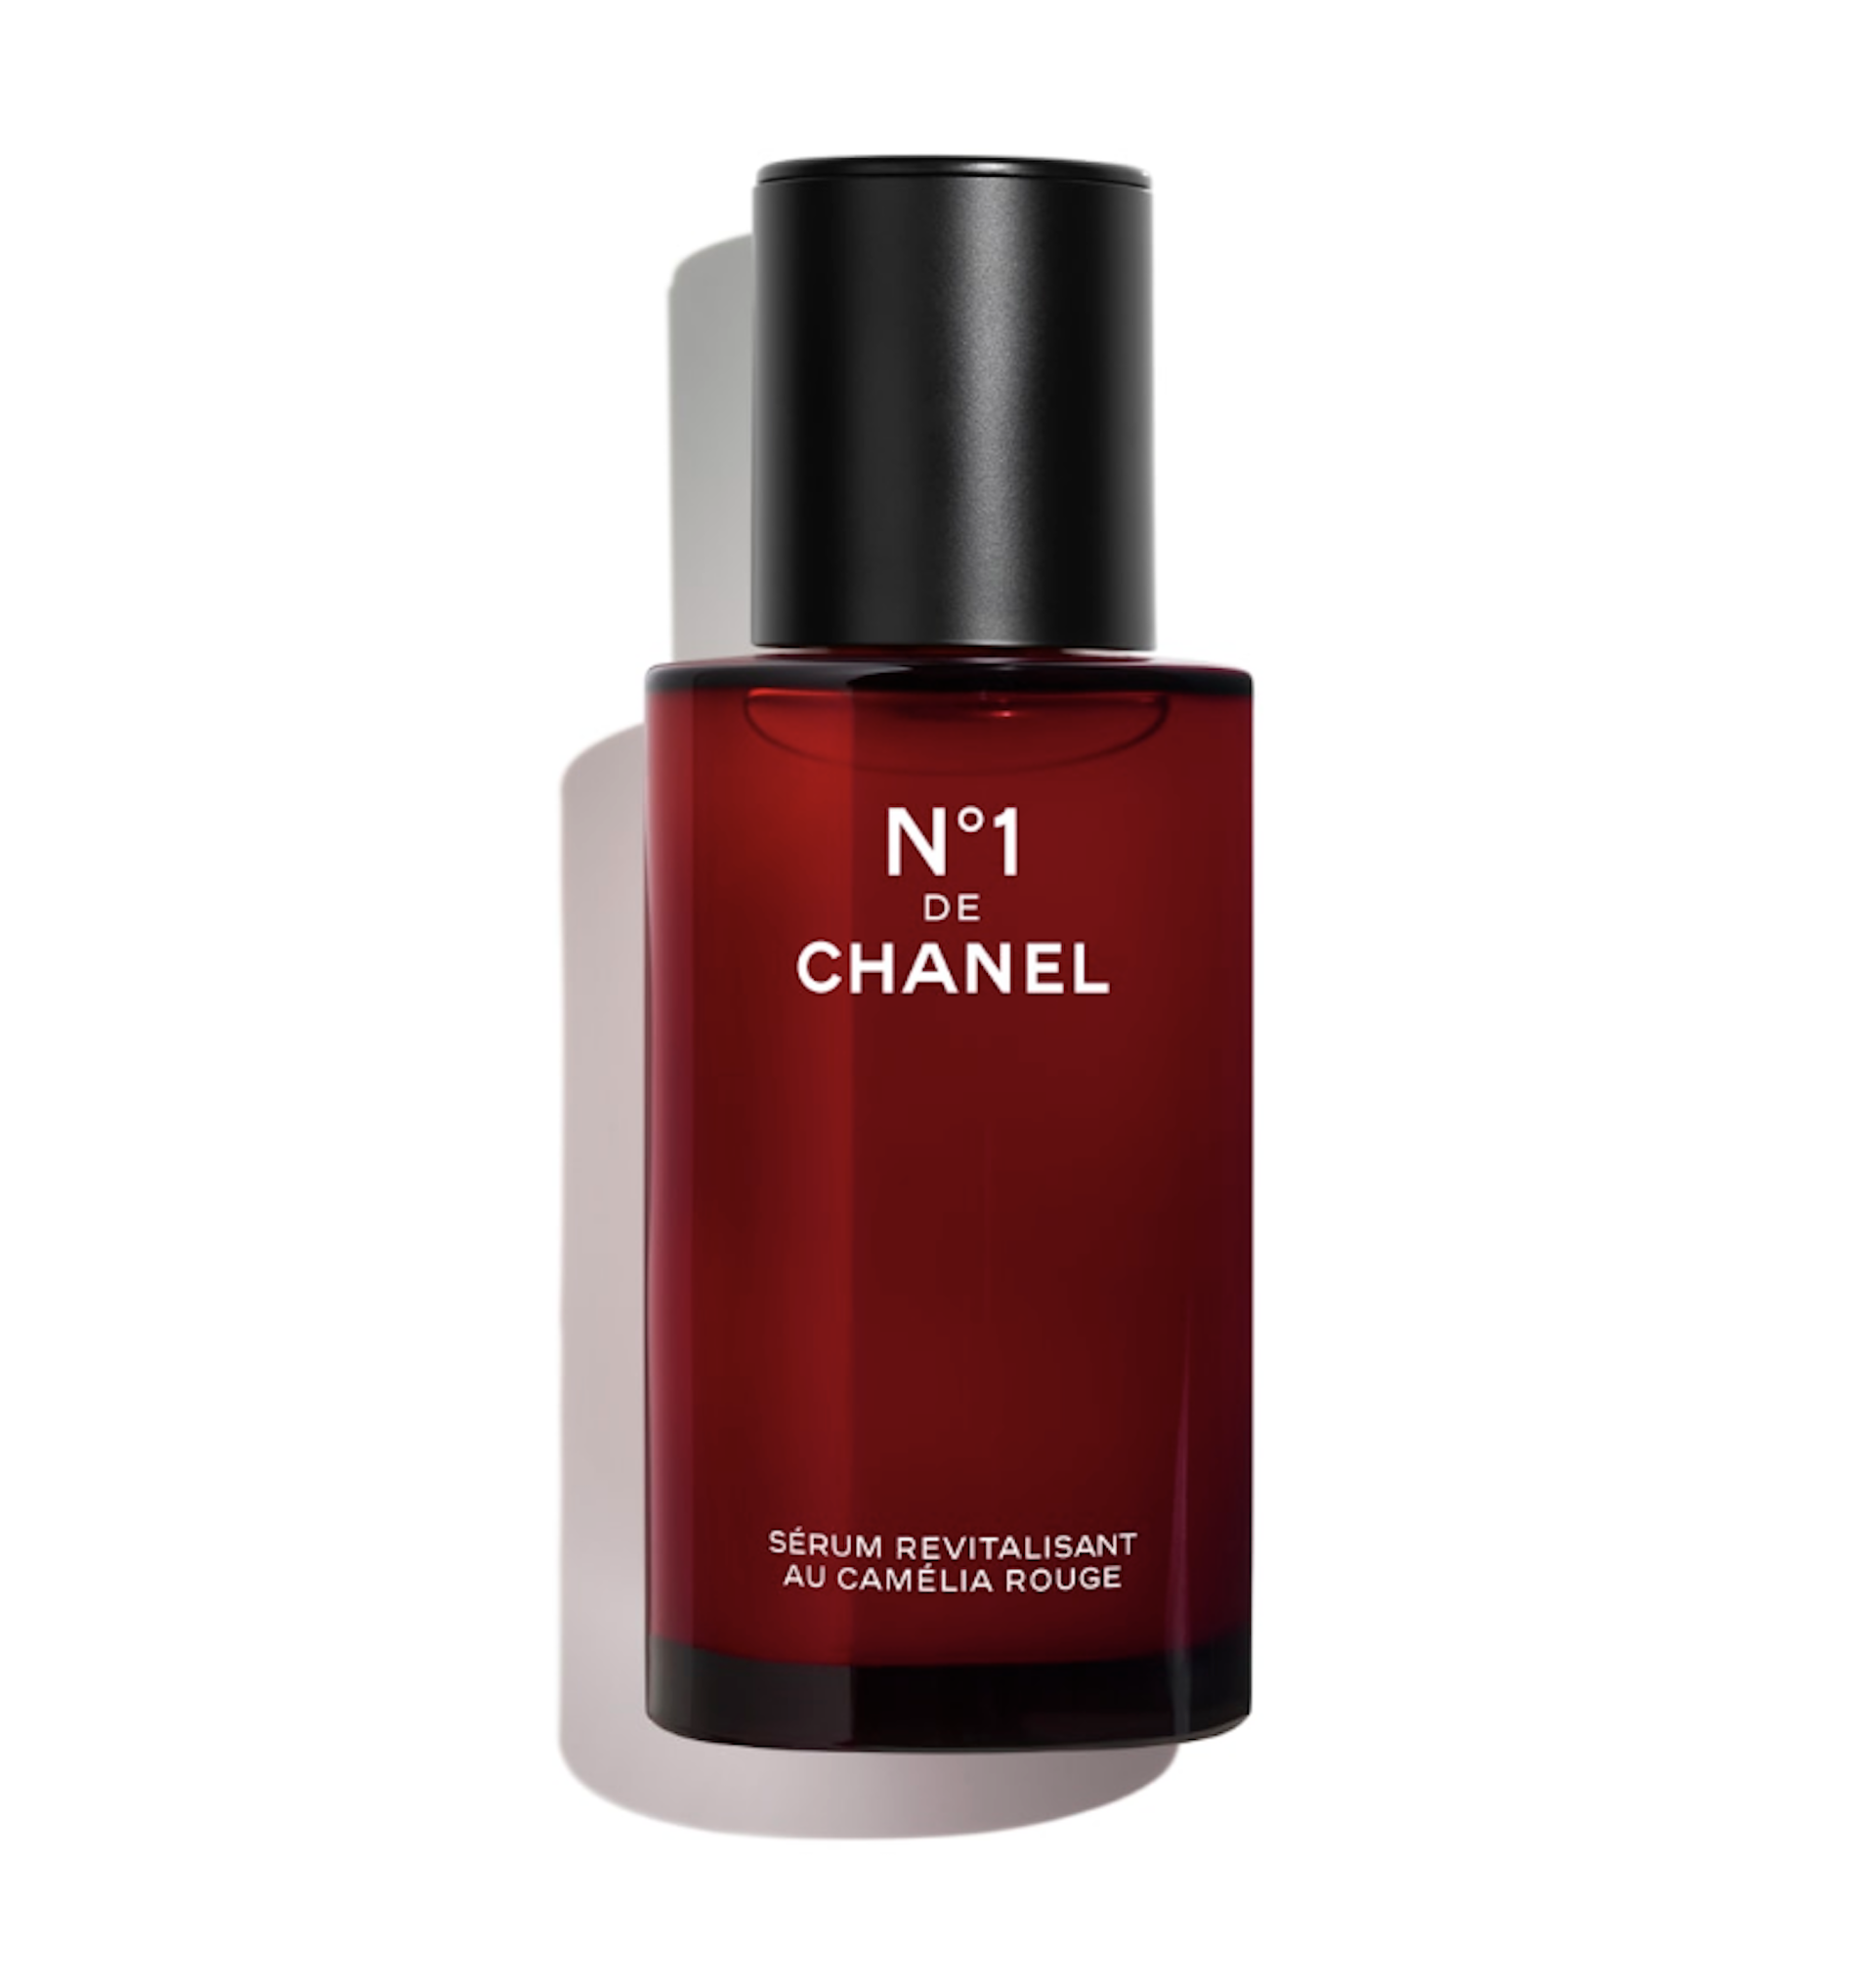 POST EDIT: N°1 de Chanel skincare's magic lies in the red camellia flower –  the sustainable luxury line uses every bit of Coco Chanel's favourite bloom